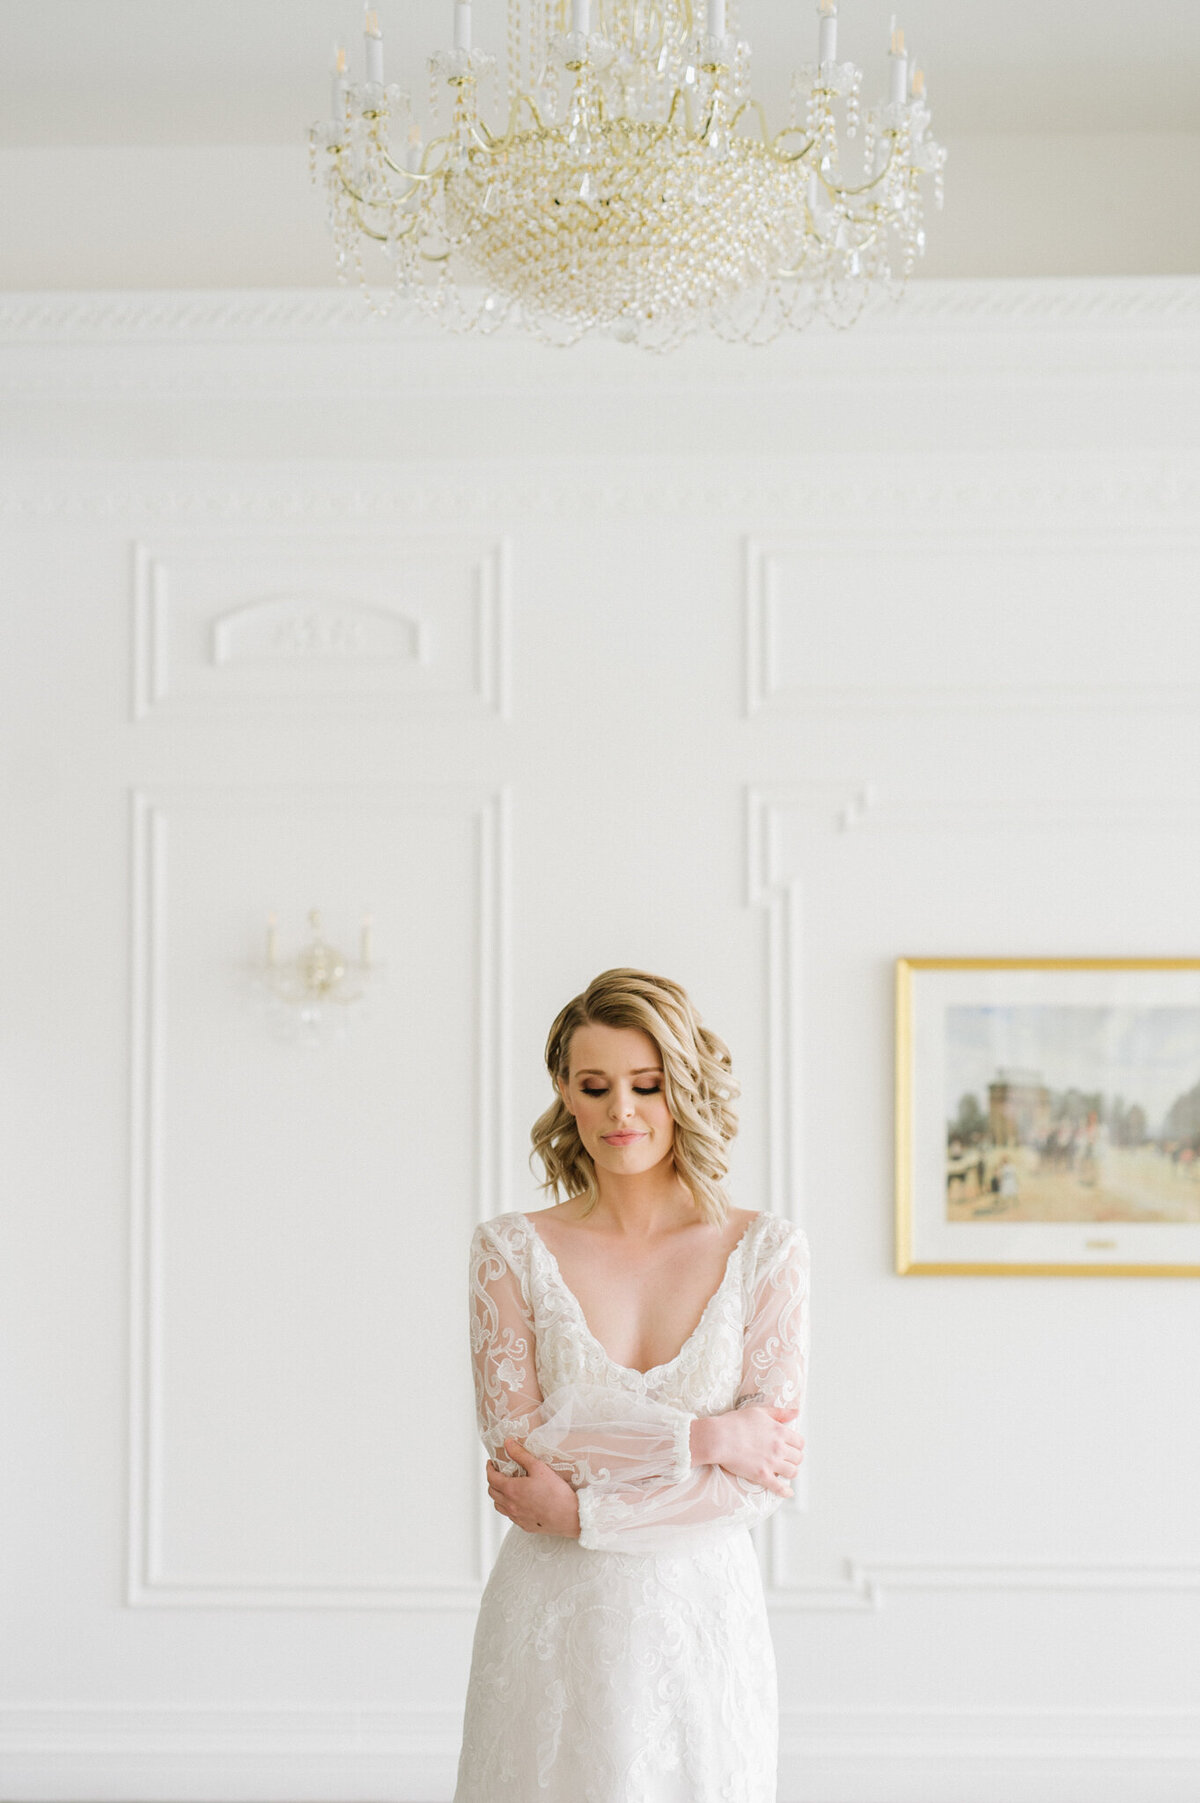 Editorial style bridal portrait, bride wearing a stunning long-sleeved gown with embroidered lace details, short wedding hair inspiration, in a white room with a gorgeous chandelier, captured by Christy D. Swanberg Photography, editorial elopement and wedding photographer in Calgary, Alberta, featured on the Bronte Bride Vendor Guide.